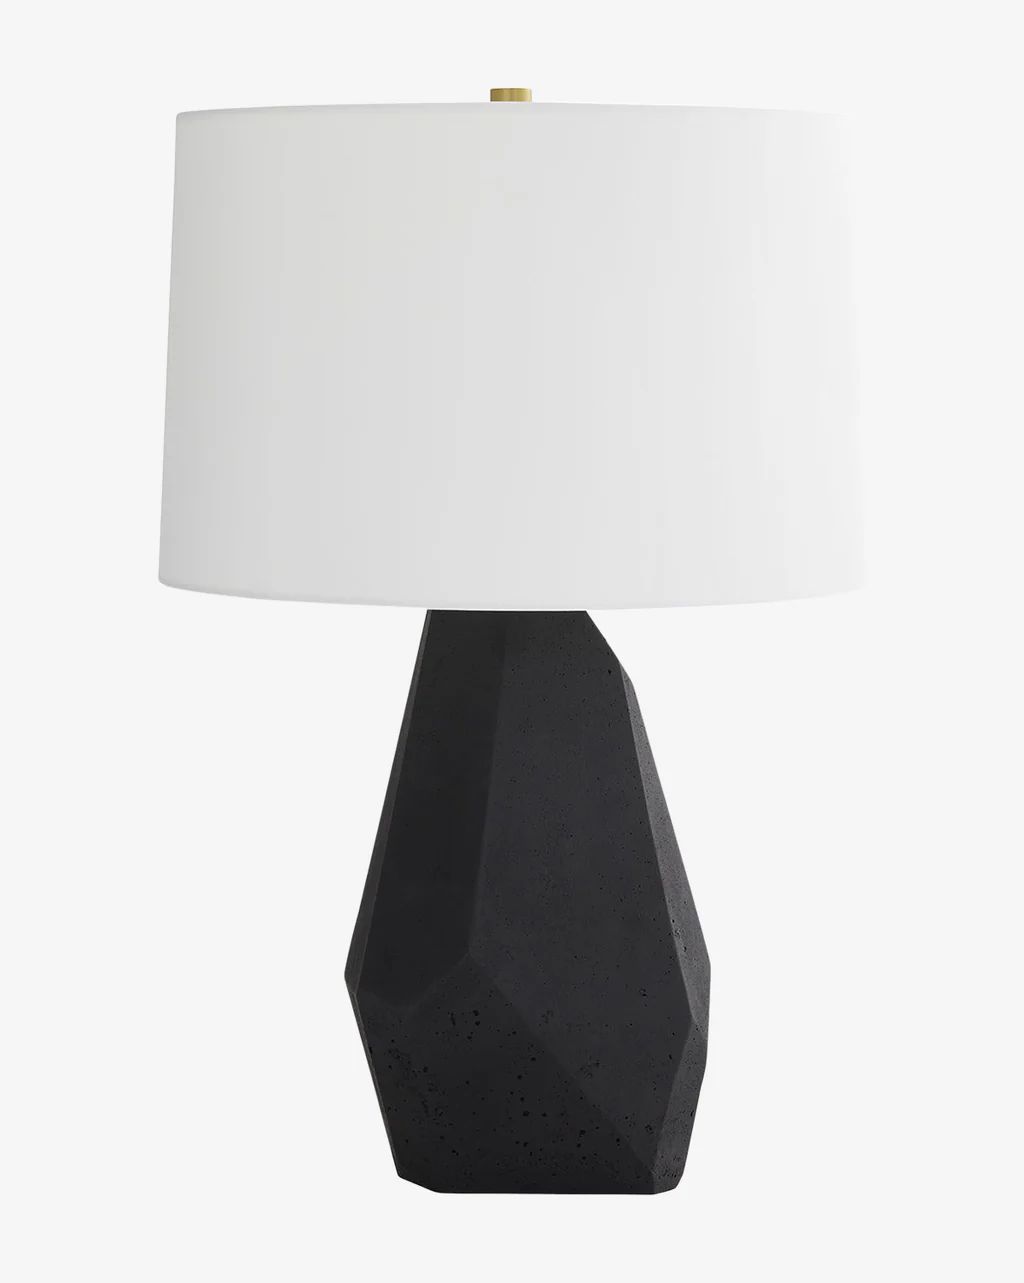 Lance Table Lamp | McGee & Co.